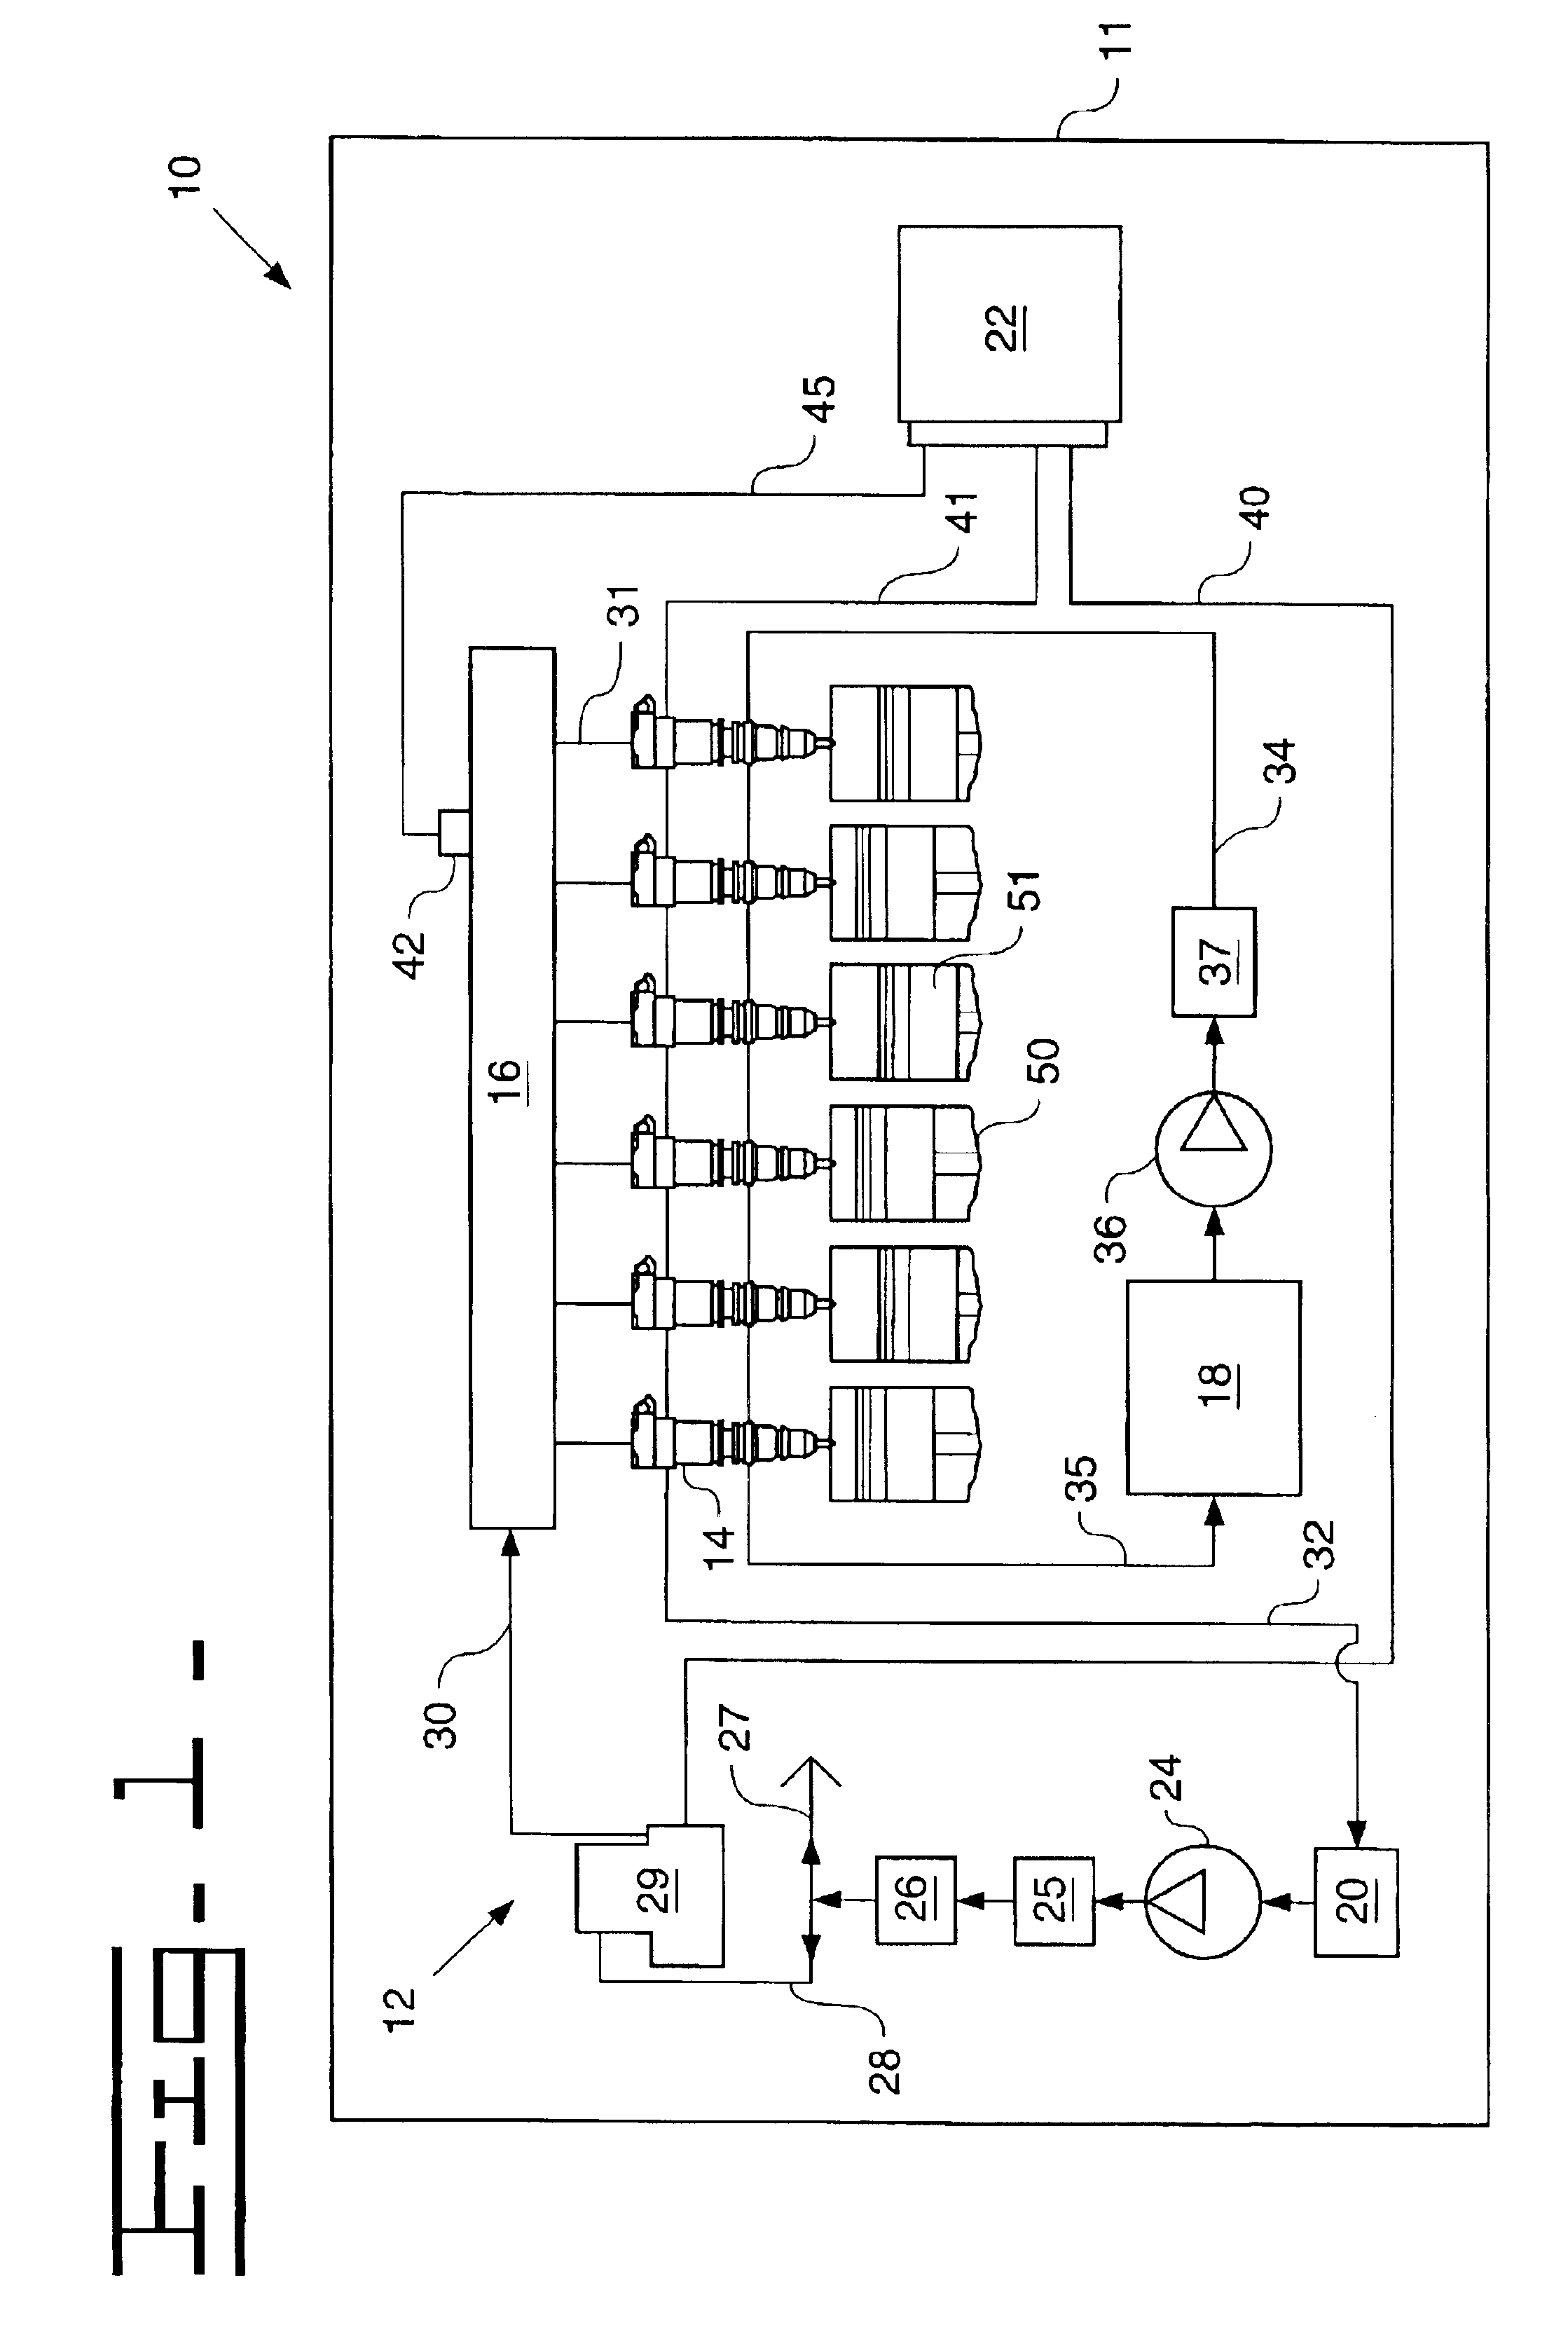 Method of utilizing multiple fuel injections to reduce engine emissions at idle